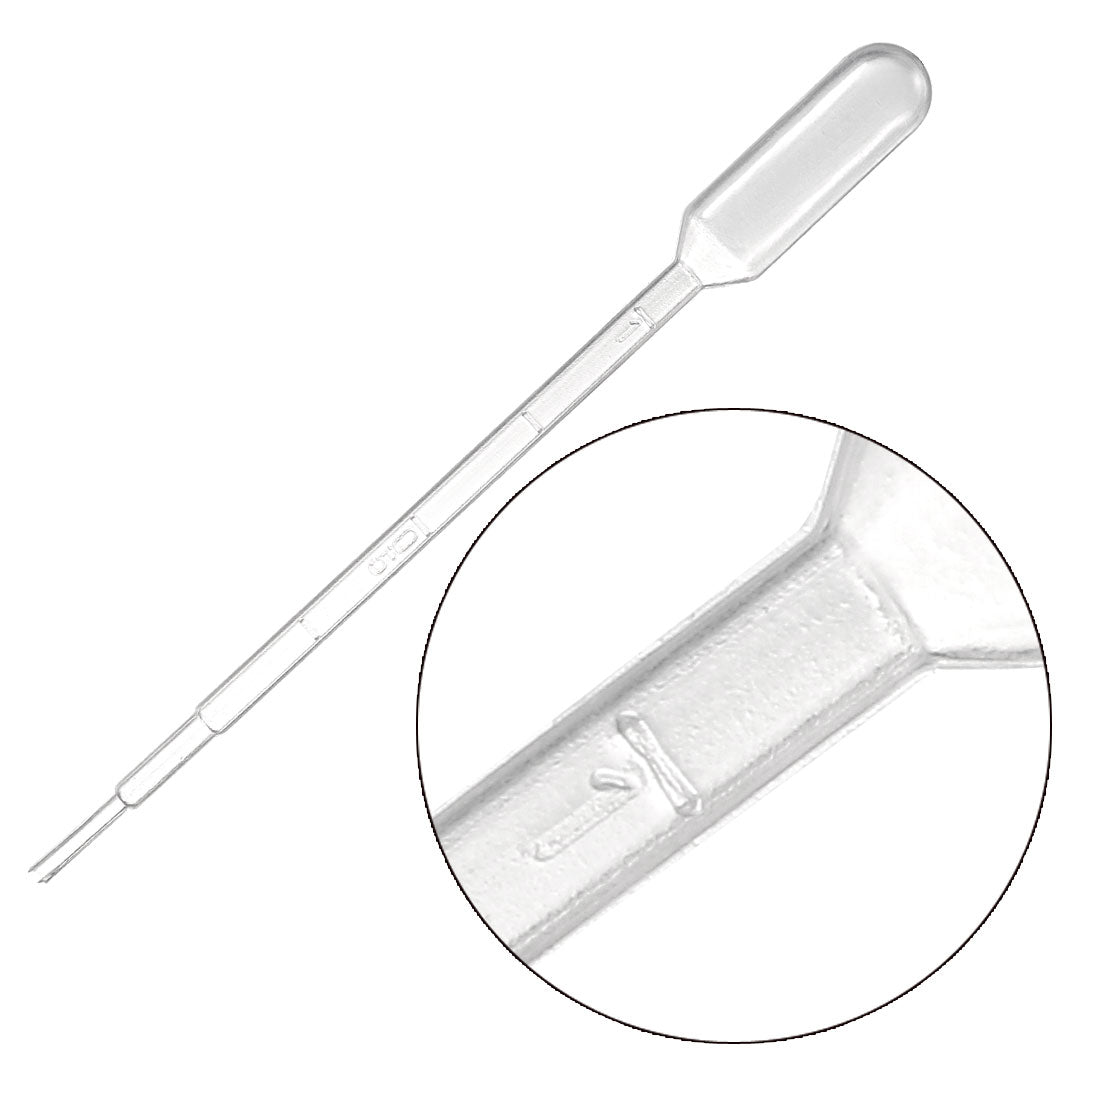 uxcell Uxcell 100 Pcs 1ml Disposable Pasteur Pipettes Test Tubes Liquid Drop Droppers Graduated 144mm Long